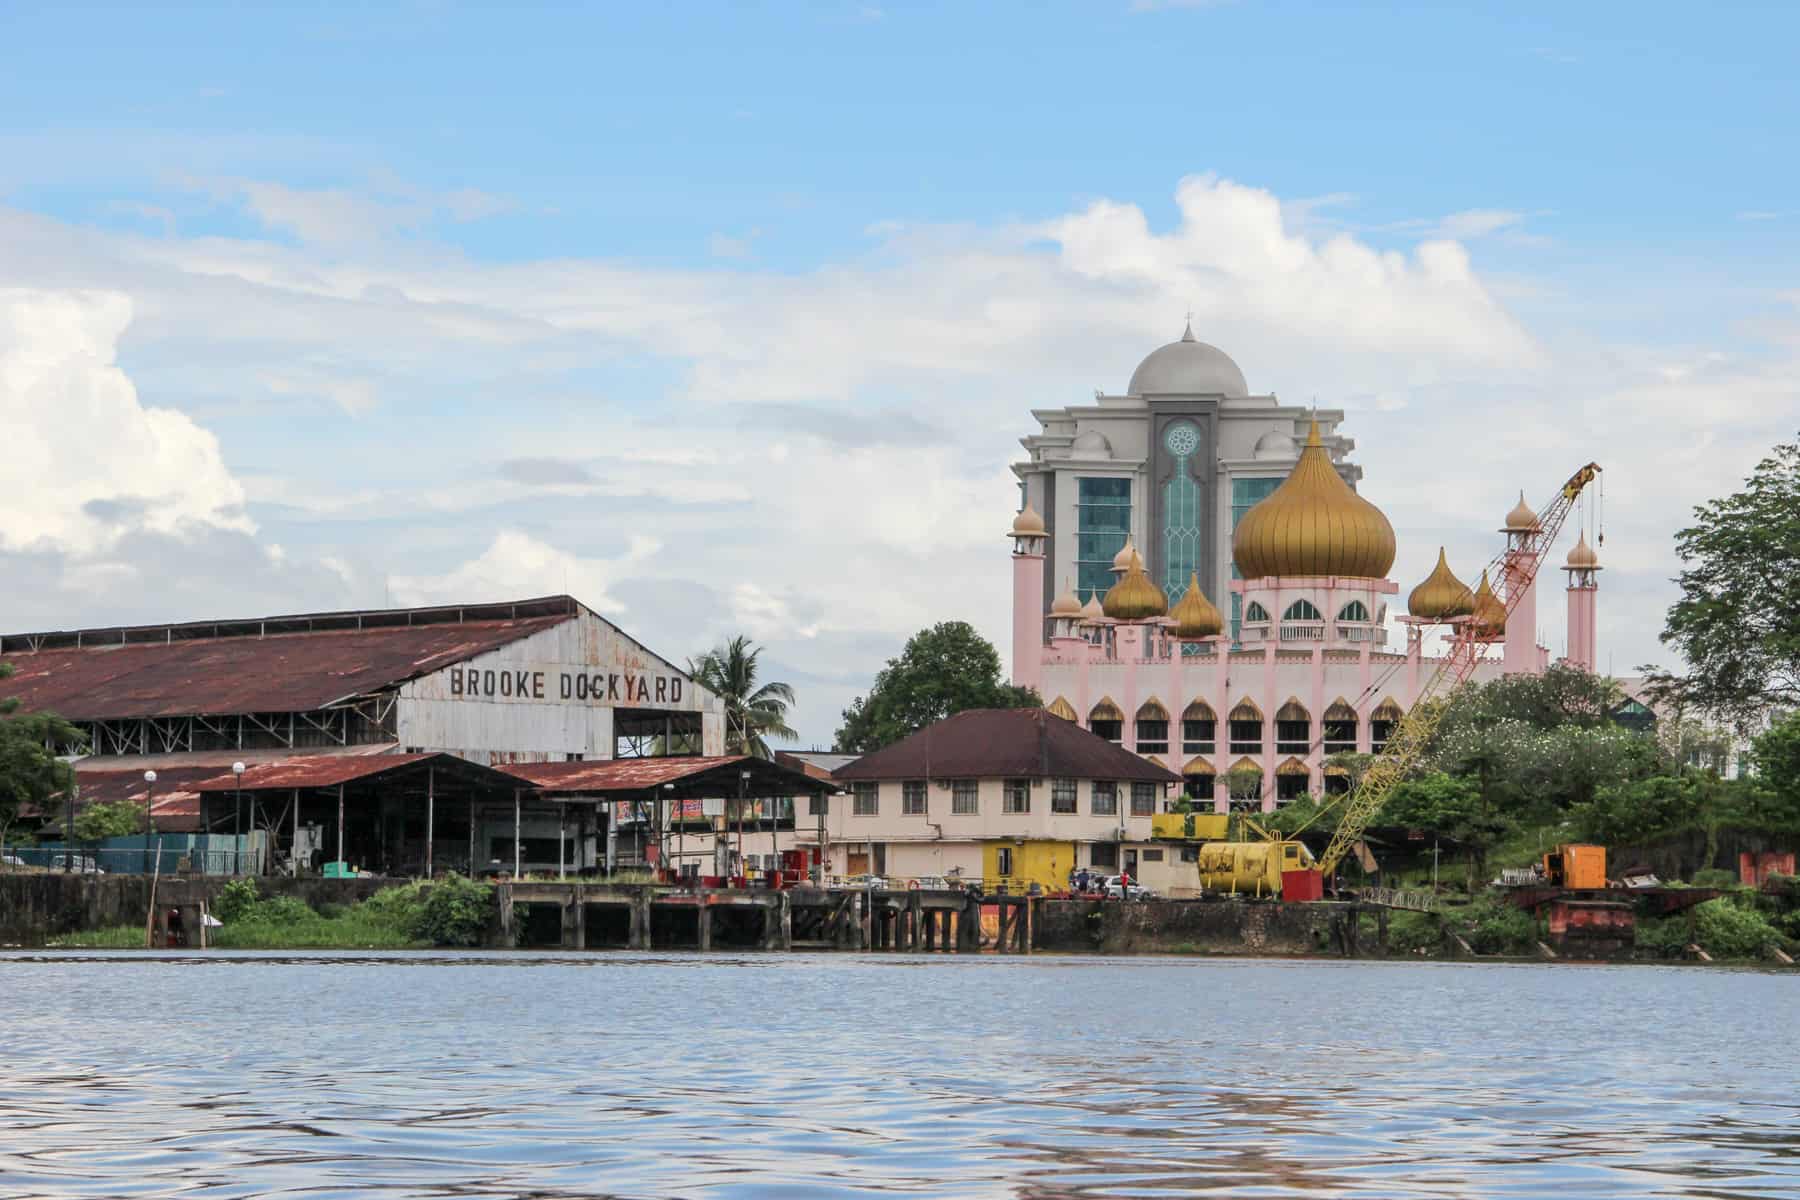 The historical attractions in Kuching sit on the riverfront and include the timeworn brown timber Brookes dockyard on the left and the pink painted, gold-roofed State Mosque on the right